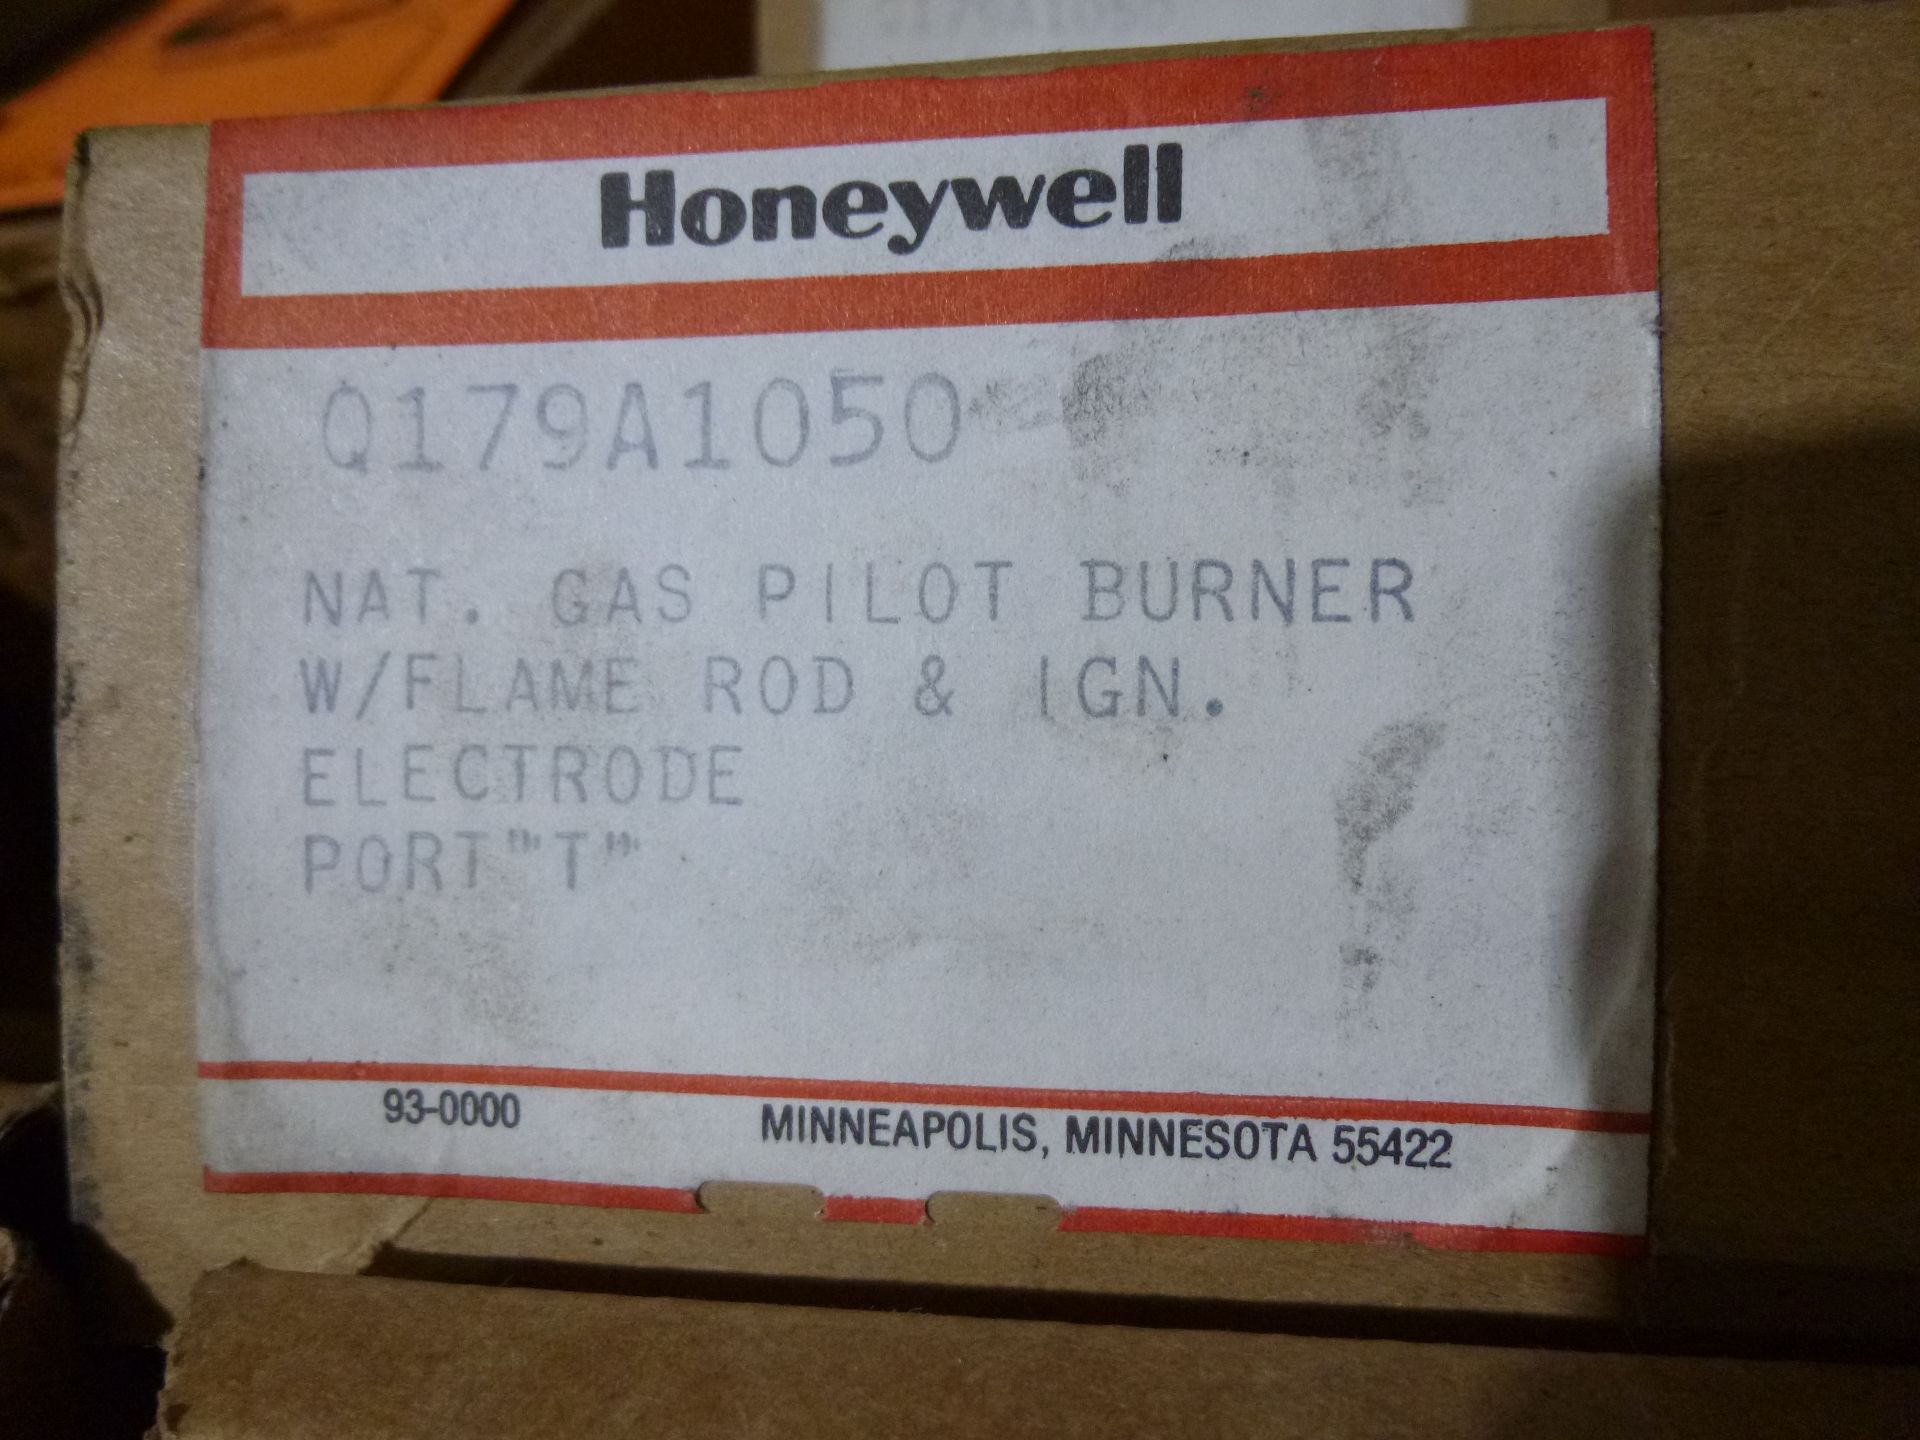 Qty 2 Honeywell, model Q179a1050, new in factory boxes, as always with Brolyn LLC auctions, all lots - Image 2 of 2